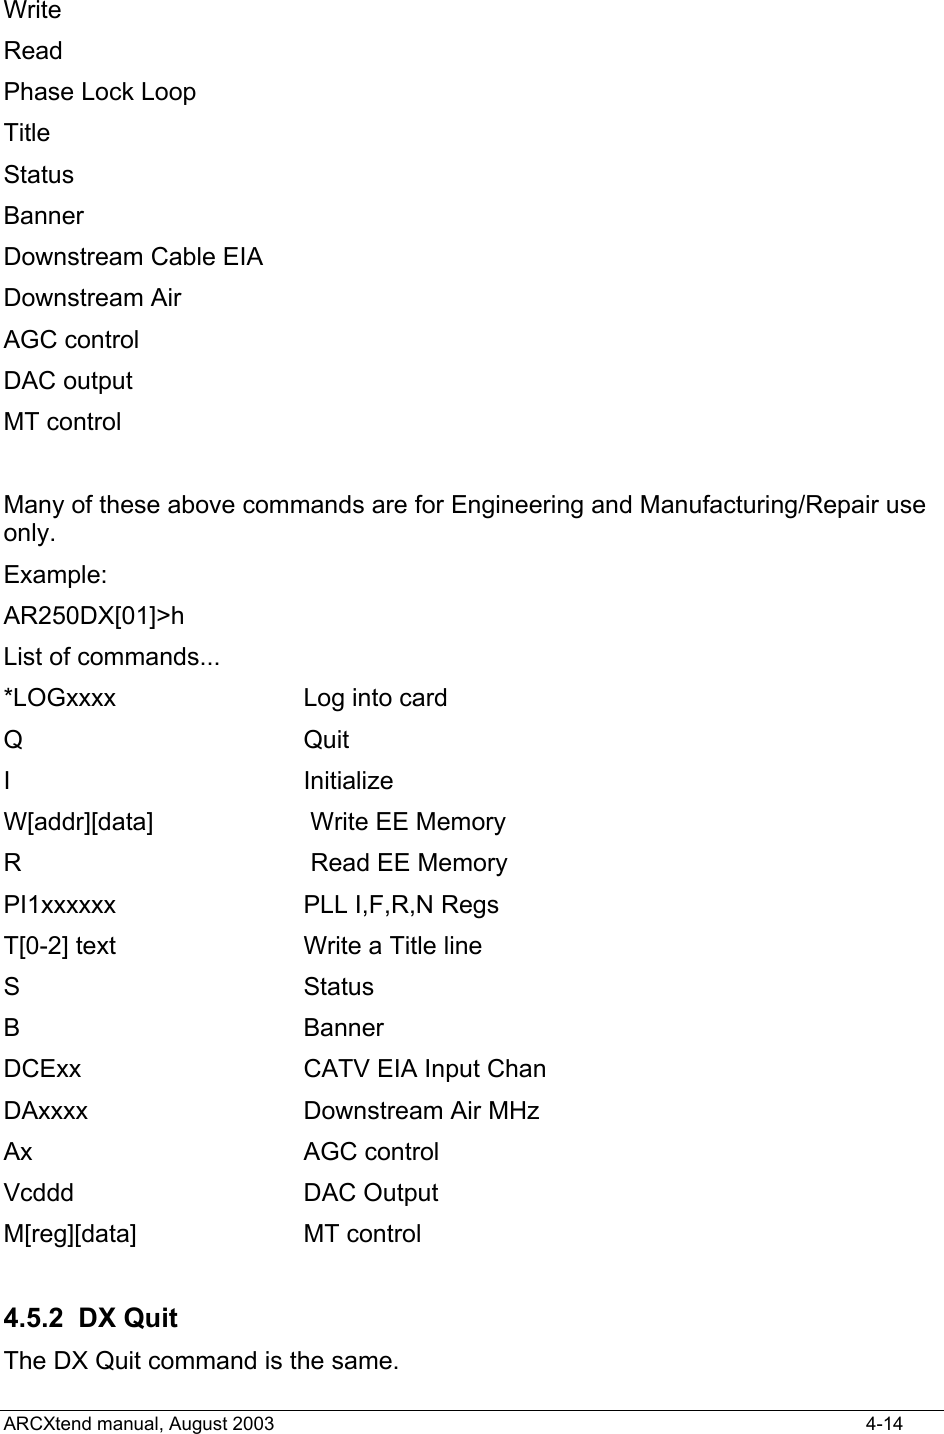  Write Read Phase Lock Loop Title Status Banner Downstream Cable EIA Downstream Air AGC control DAC output MT control  Many of these above commands are for Engineering and Manufacturing/Repair use only. Example: AR250DX[01]&gt;h List of commands... *LOGxxxx         Log into card Q                 Quit I                 Initialize W[addr][data]     Write EE Memory R                 Read EE Memory PI1xxxxxx         PLL I,F,R,N Regs T[0-2] text       Write a Title line S                 Status B                 Banner DCExx             CATV EIA Input Chan DAxxxx            Downstream Air MHz Ax                AGC control Vcddd             DAC Output M[reg][data]      MT control  4.5.2 DX Quit The DX Quit command is the same. ARCXtend manual, August 2003    4-14 